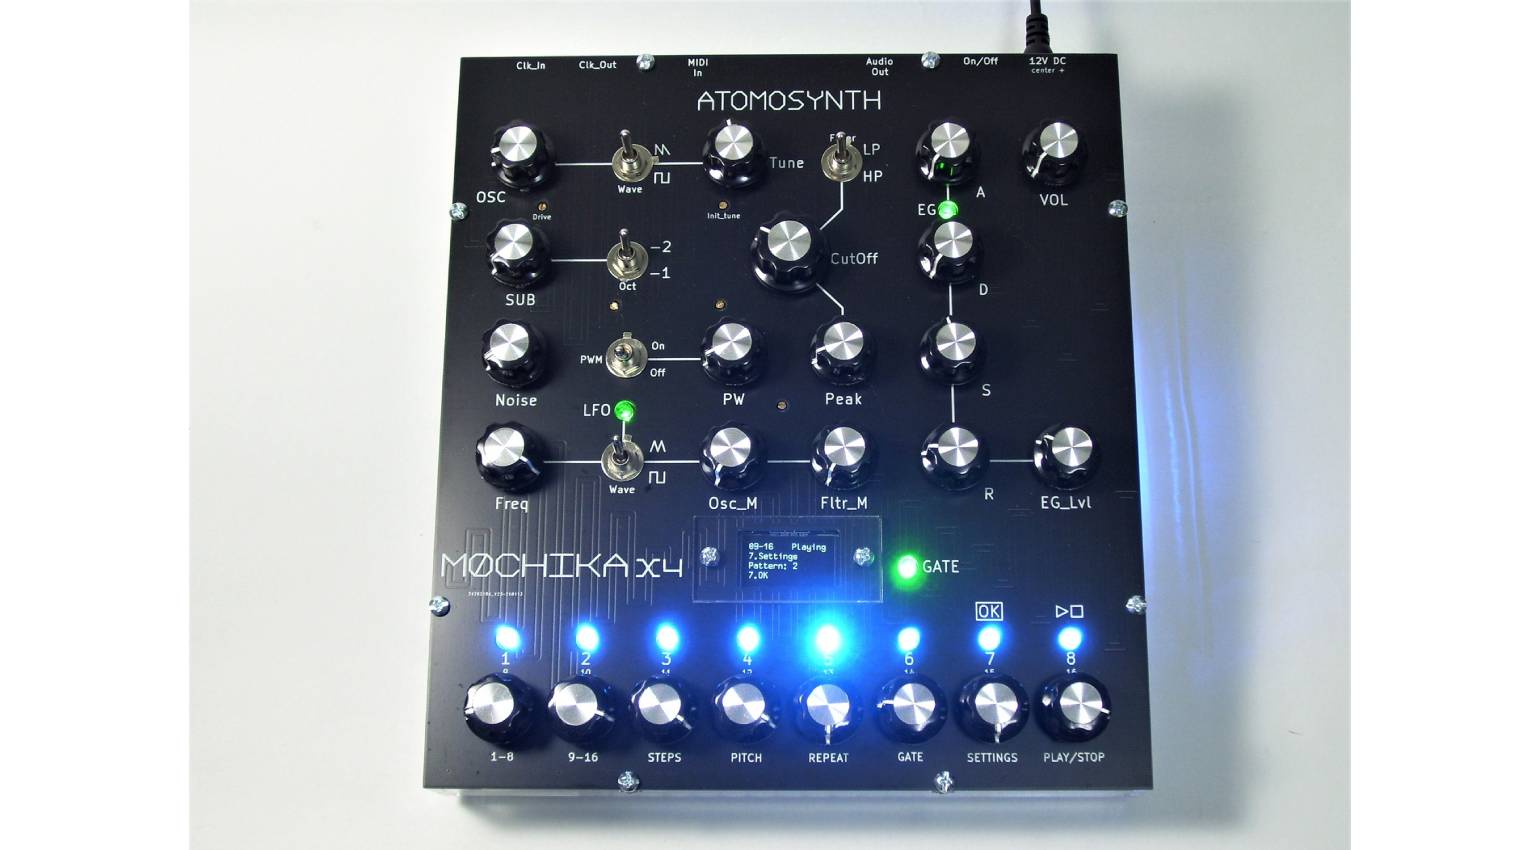 MOCHIKA X4: New version of AtomoSynth's fat analogue synth - gearnews.com